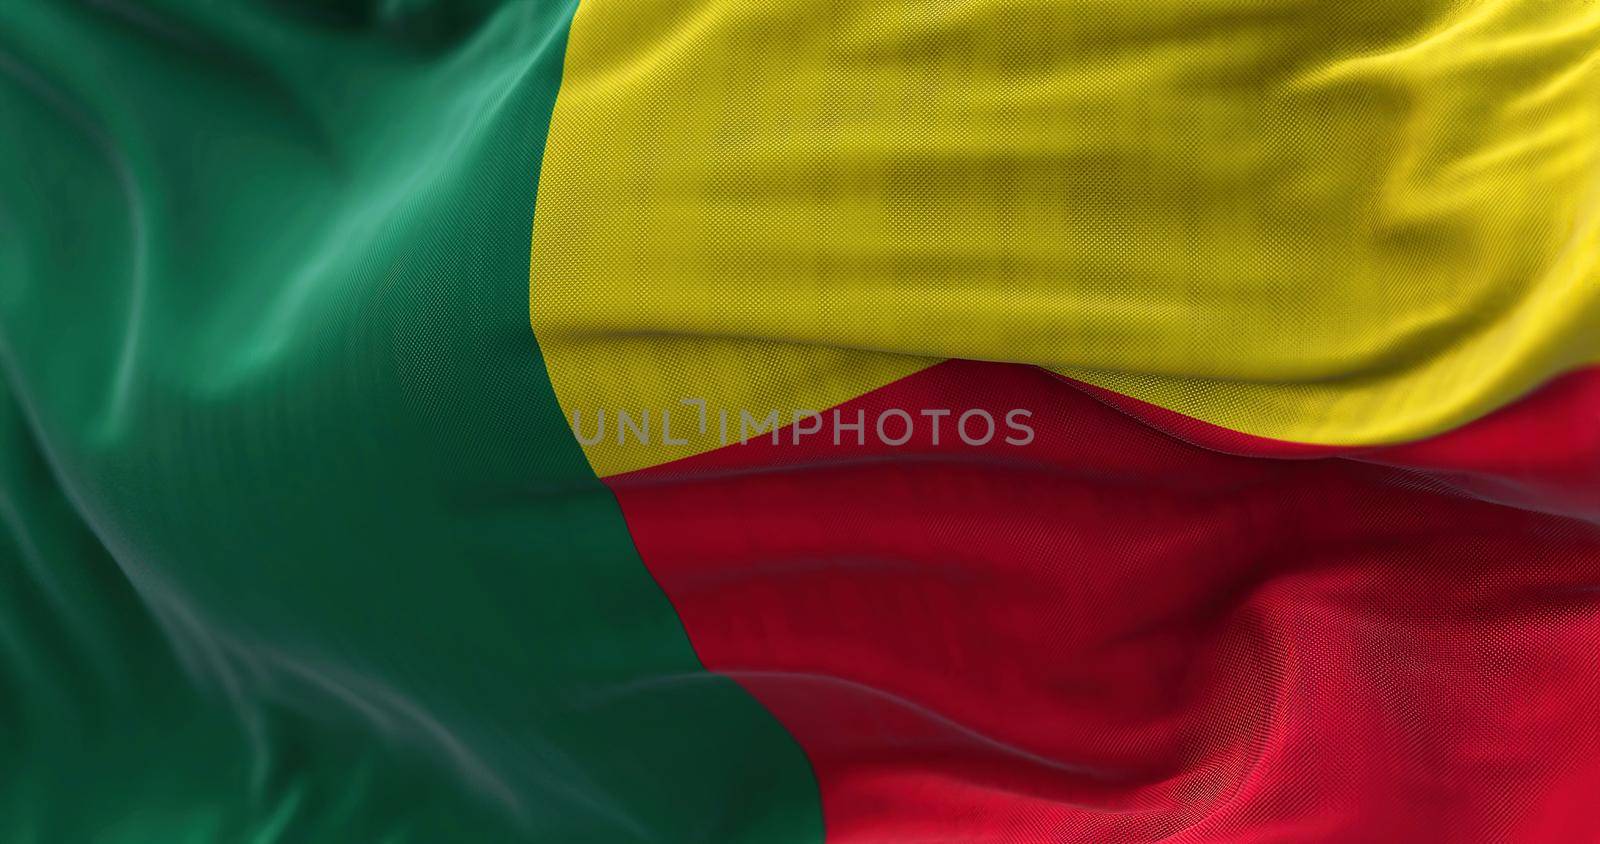 Close-up view of the Benin national flag waving in the wind. The Republic of Benin is a country in West Africa. Fabric textured background. Selective focus